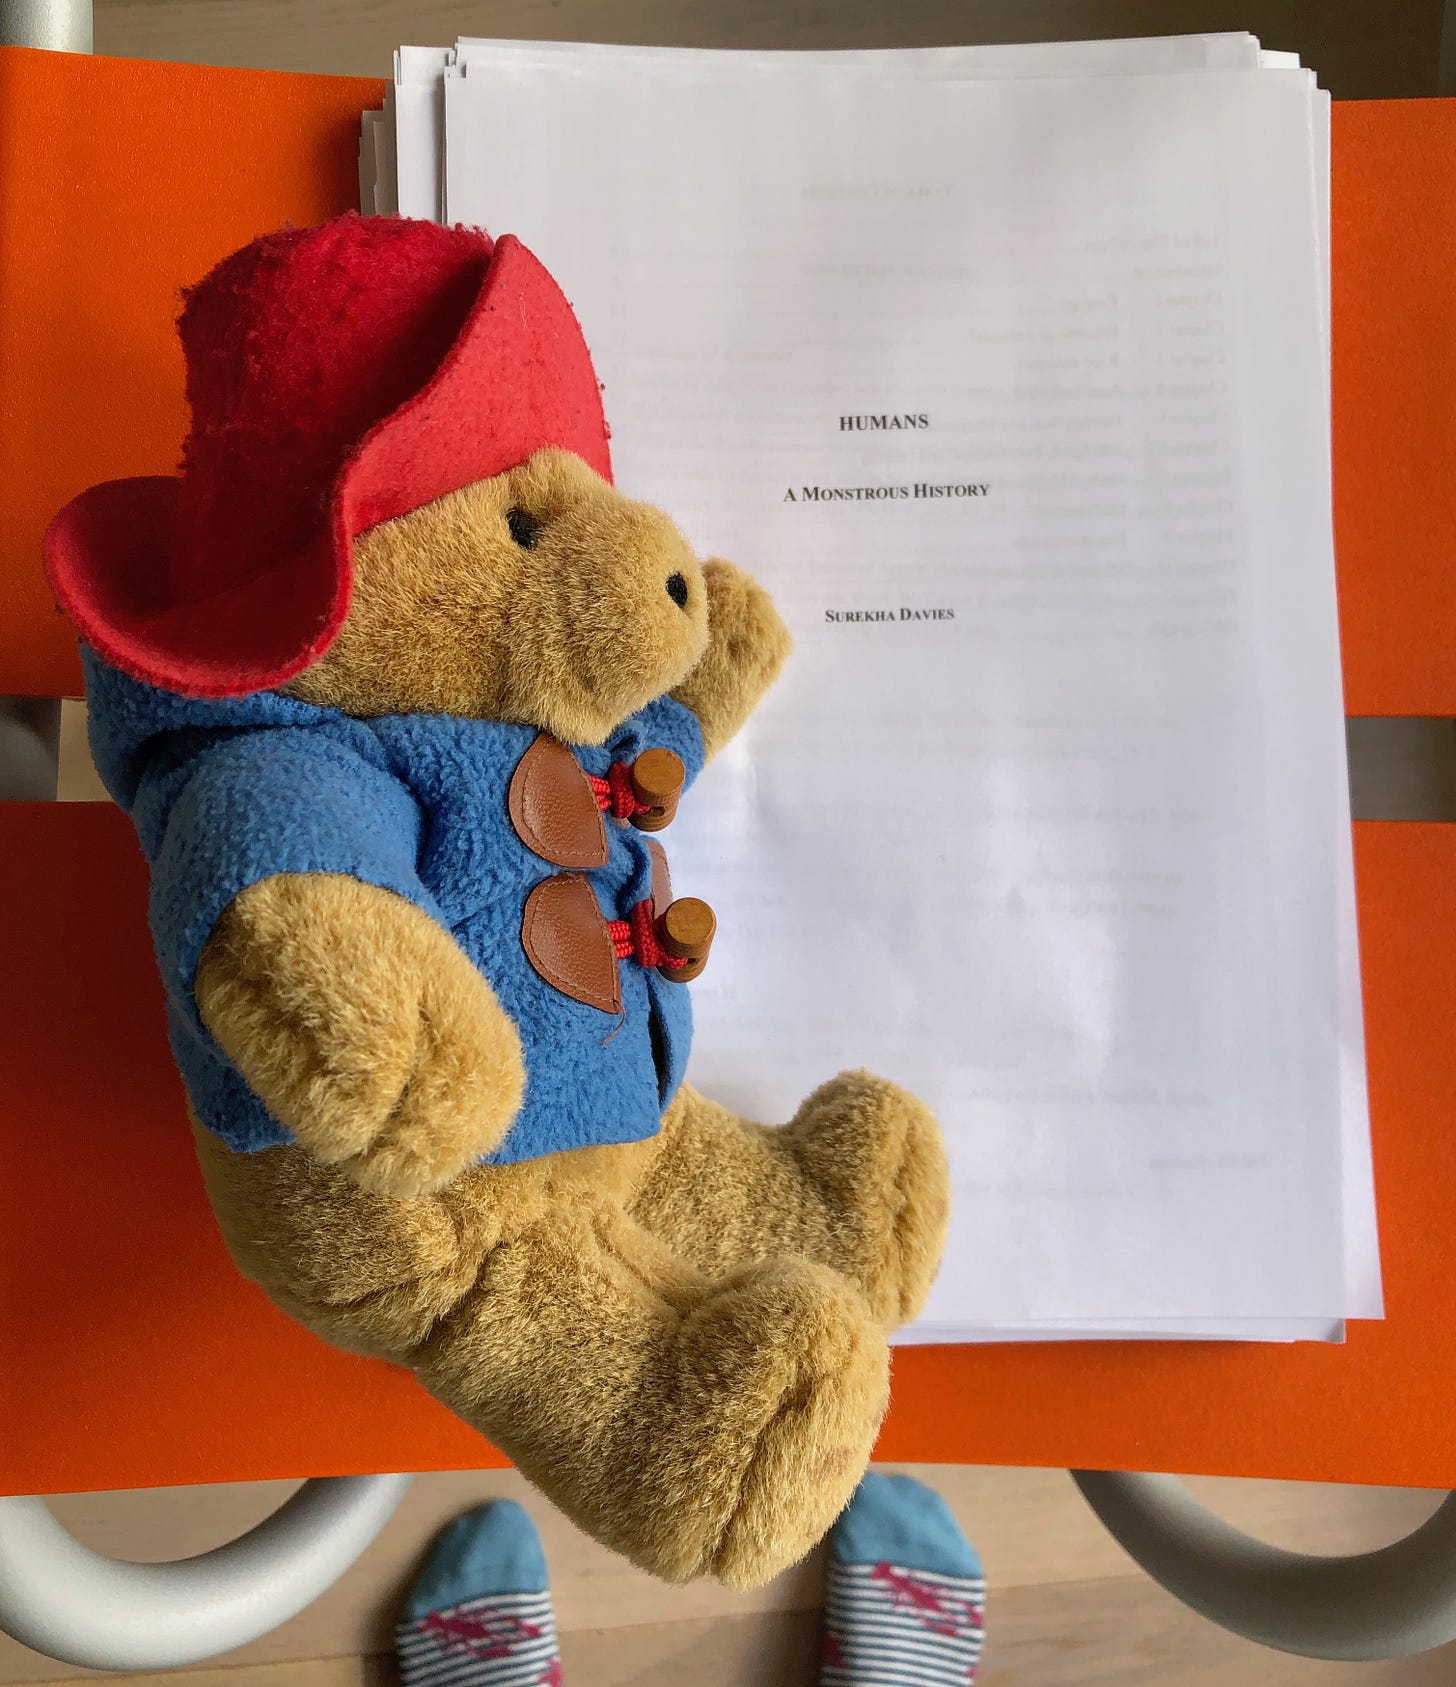 A bear in a floppy hat and duffle coat lies on a printout of a book manuscript on a chair. A pair of feet in stripy lobster socks is visible under the chair.